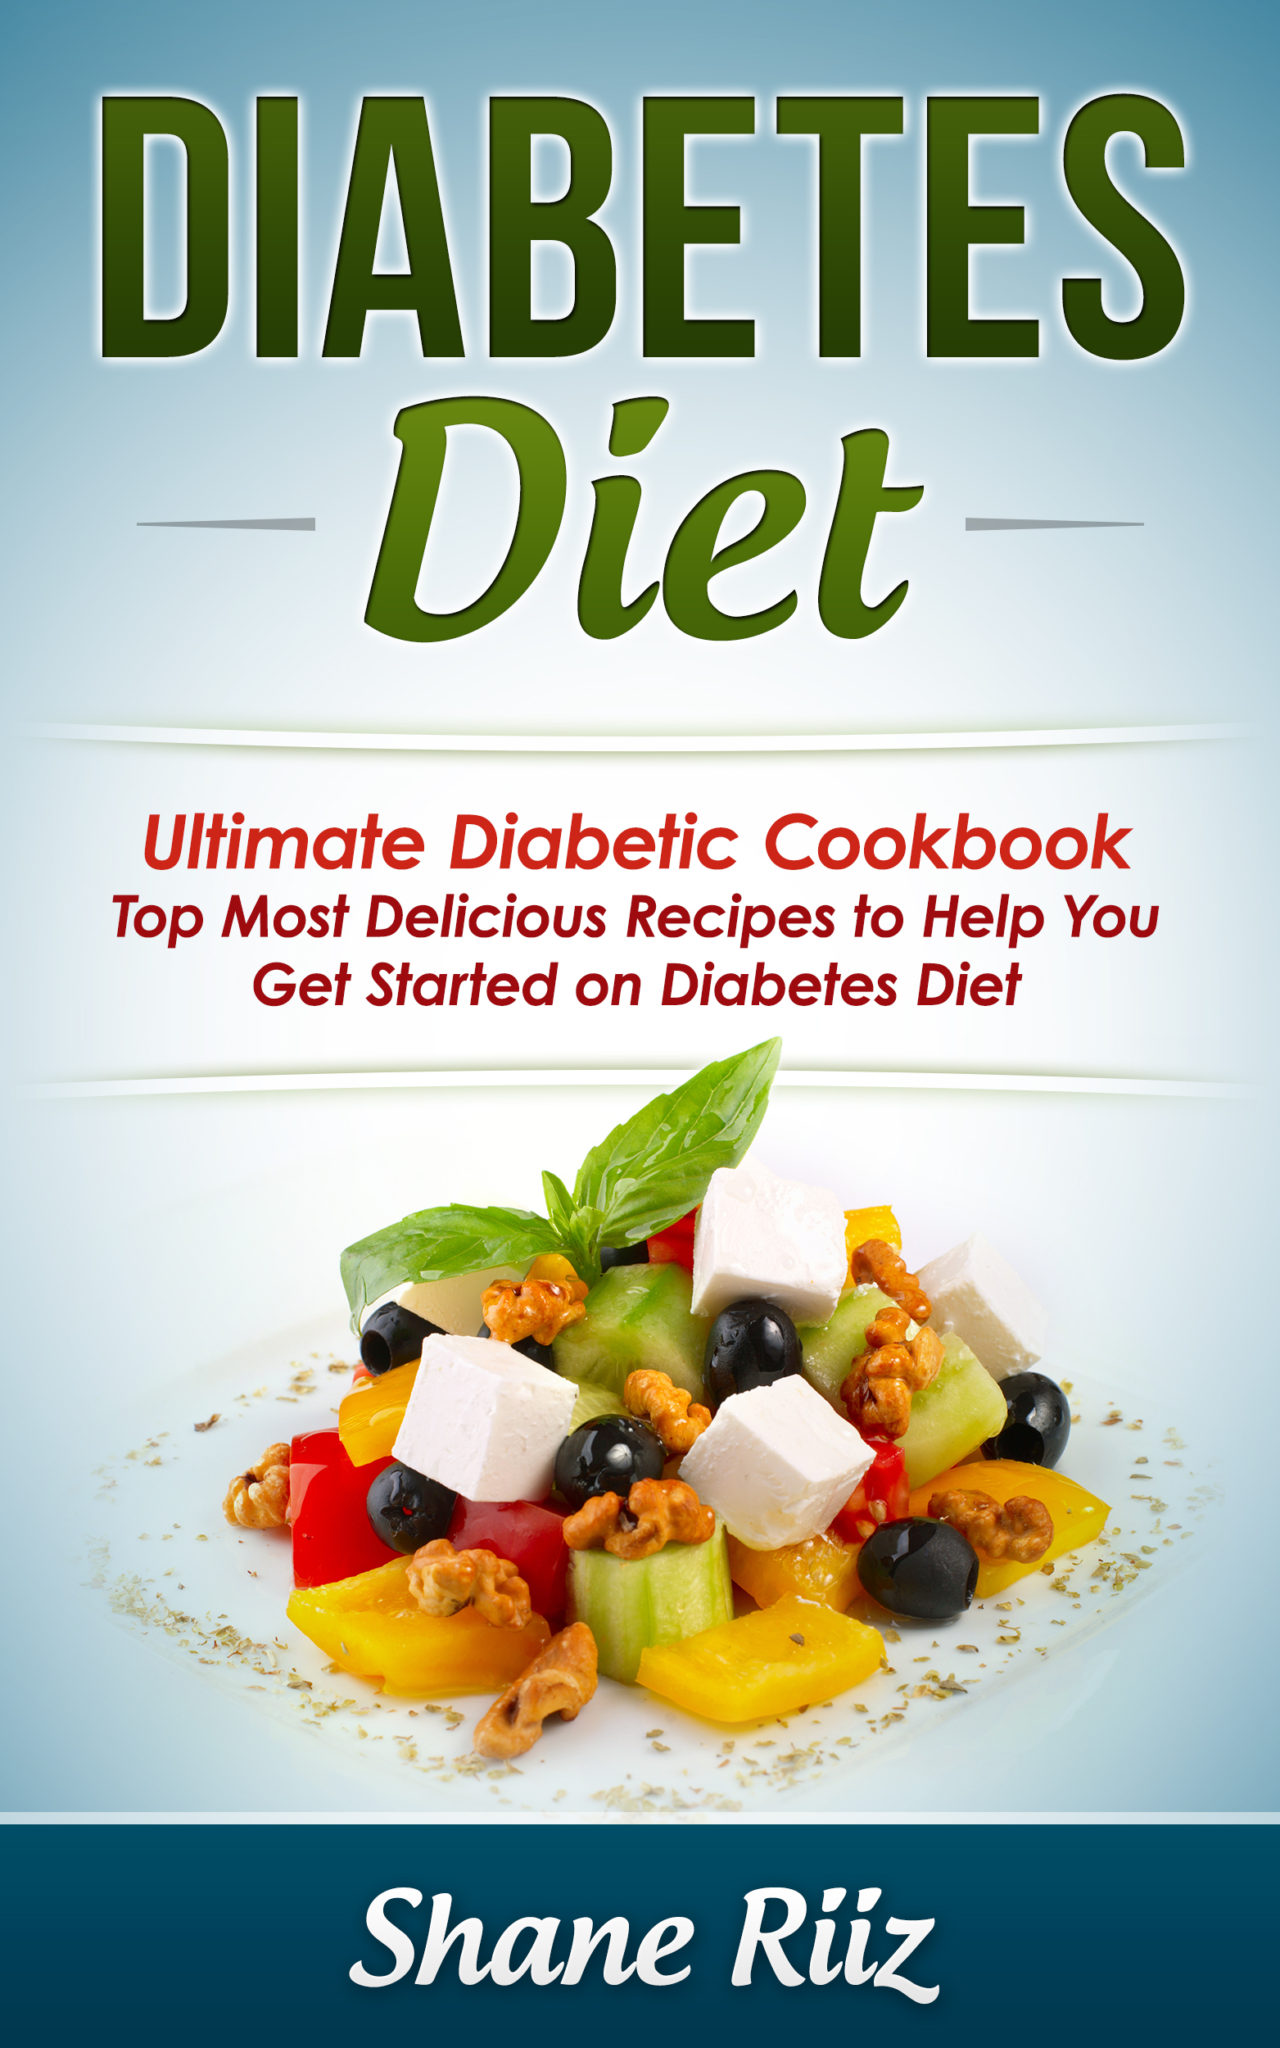 FREE: Diabetes Diet: Ultimate Diabetic Cookbook – Top Most Delicious Recipes to Help You Get Started on Diabetes Diet by Shane Riiz